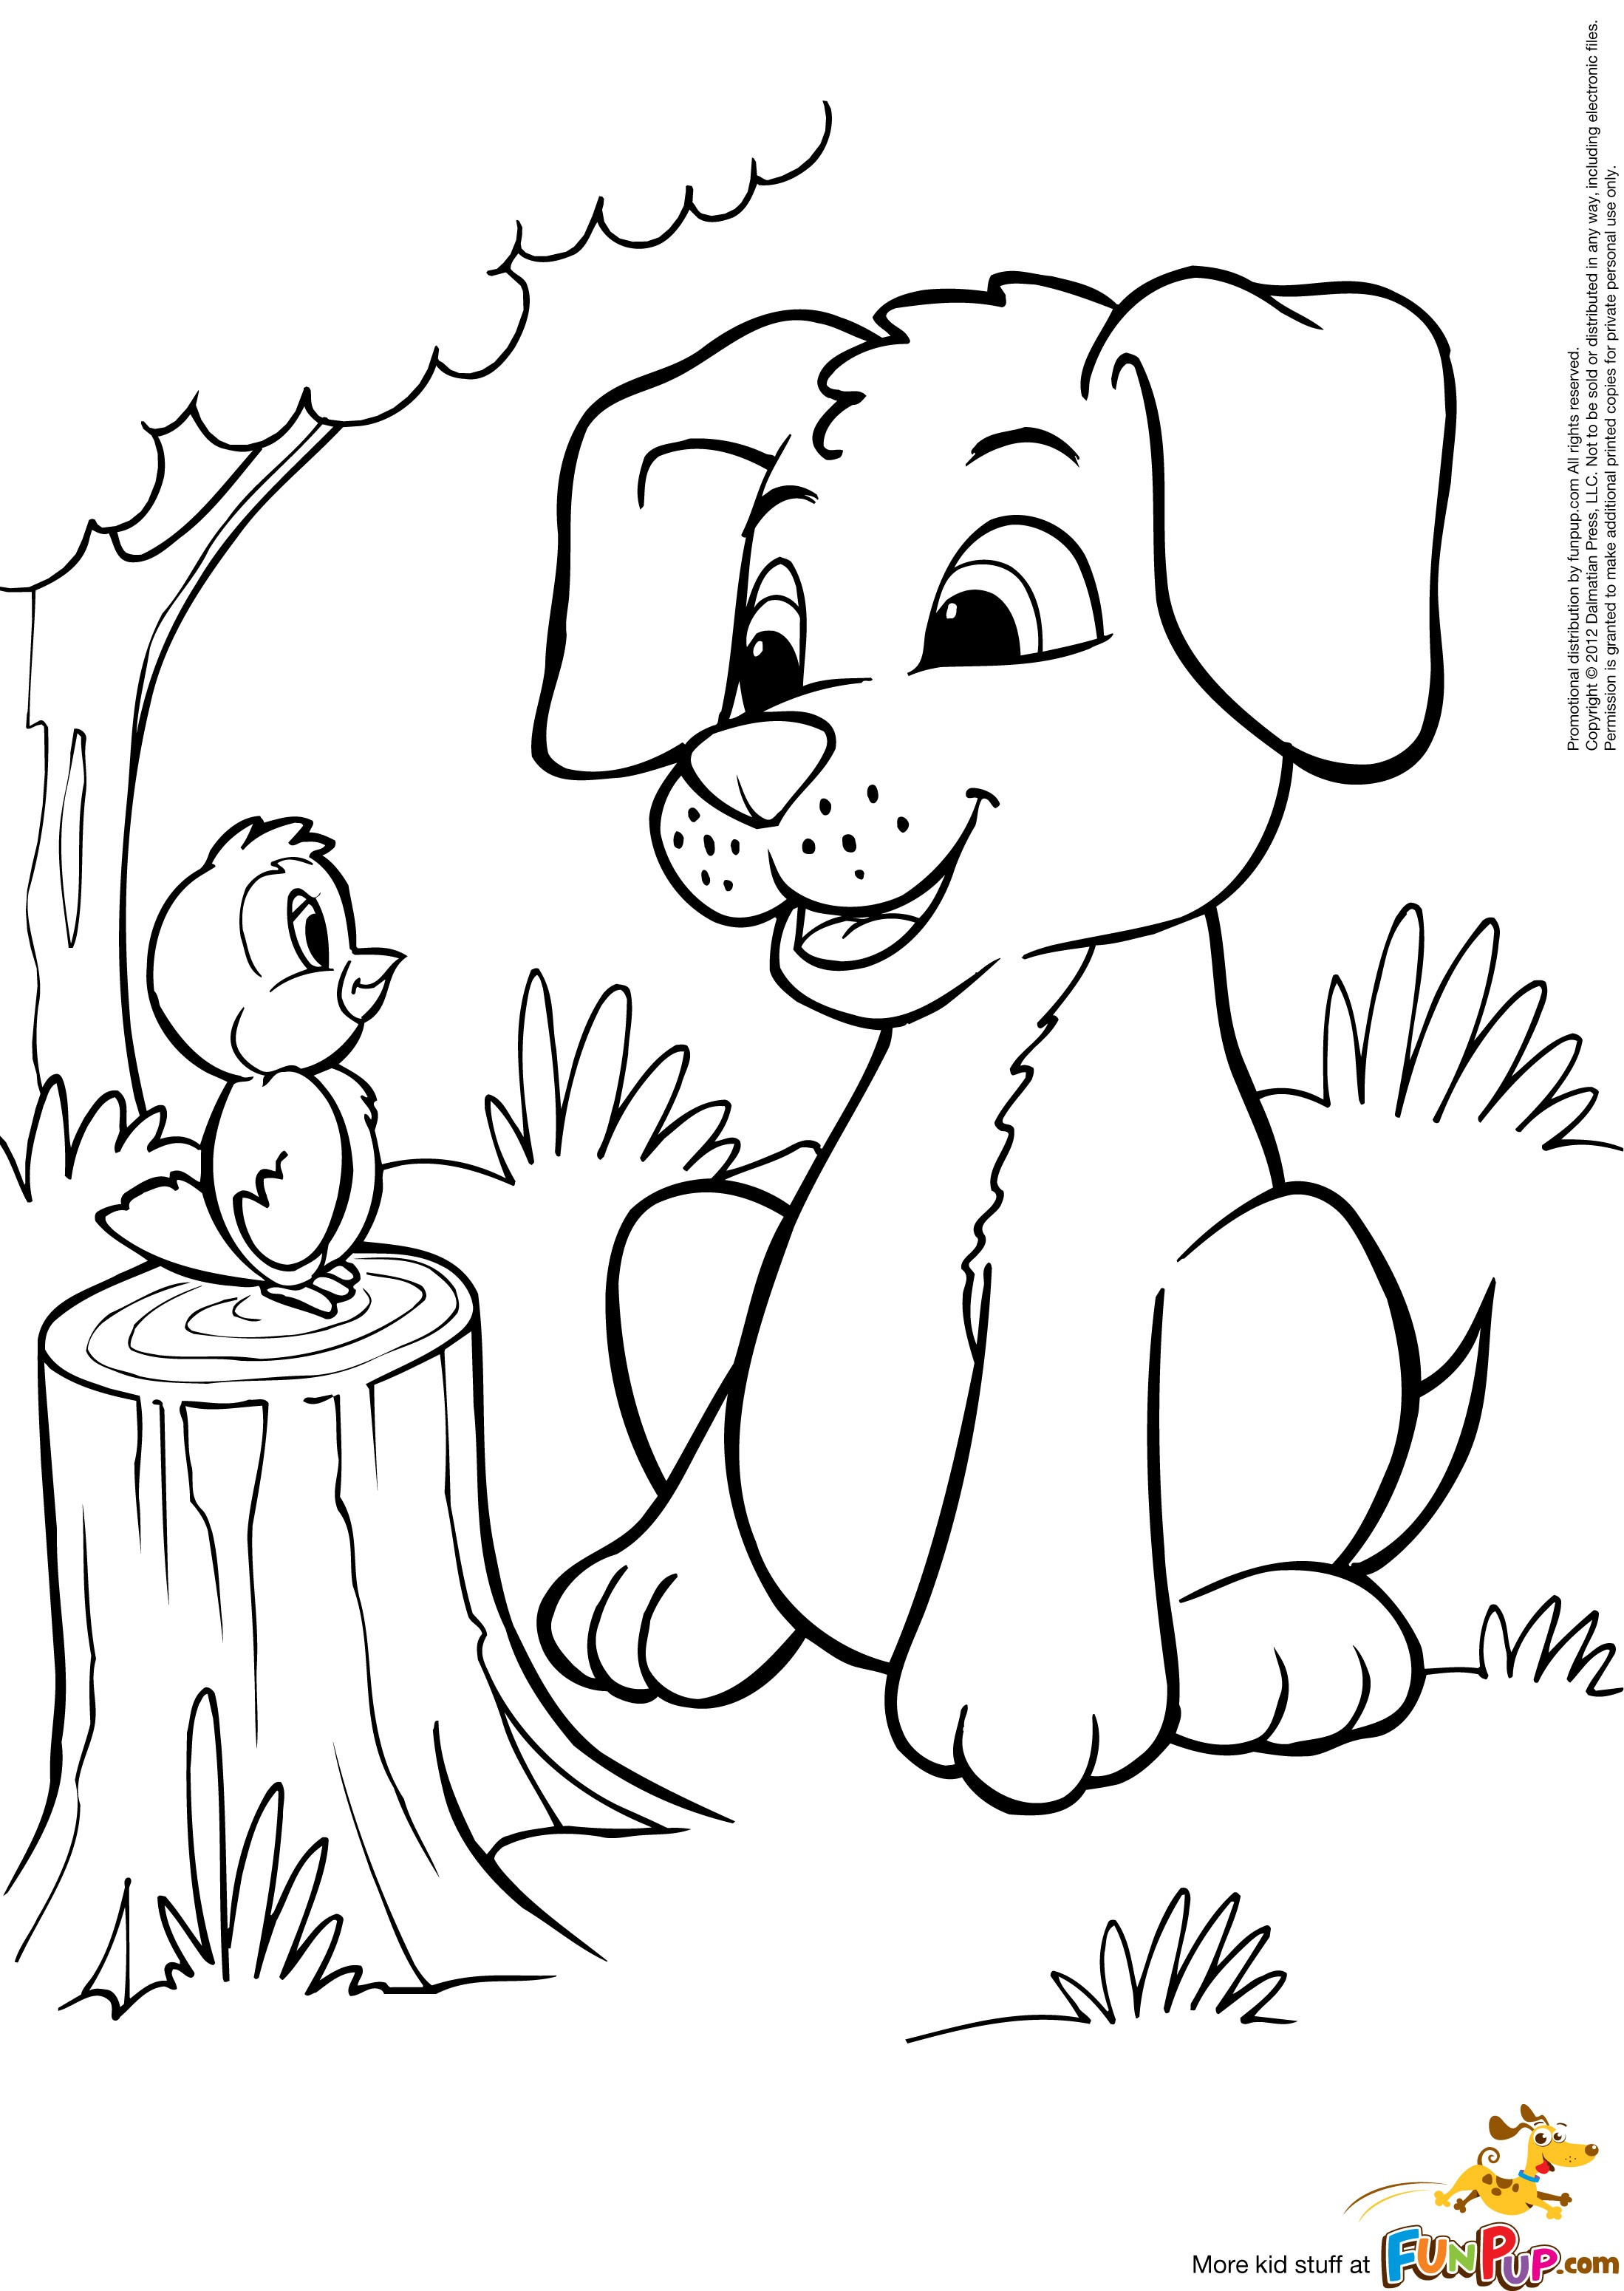 Thundermans Coloring Pages At GetColorings Free Printable 